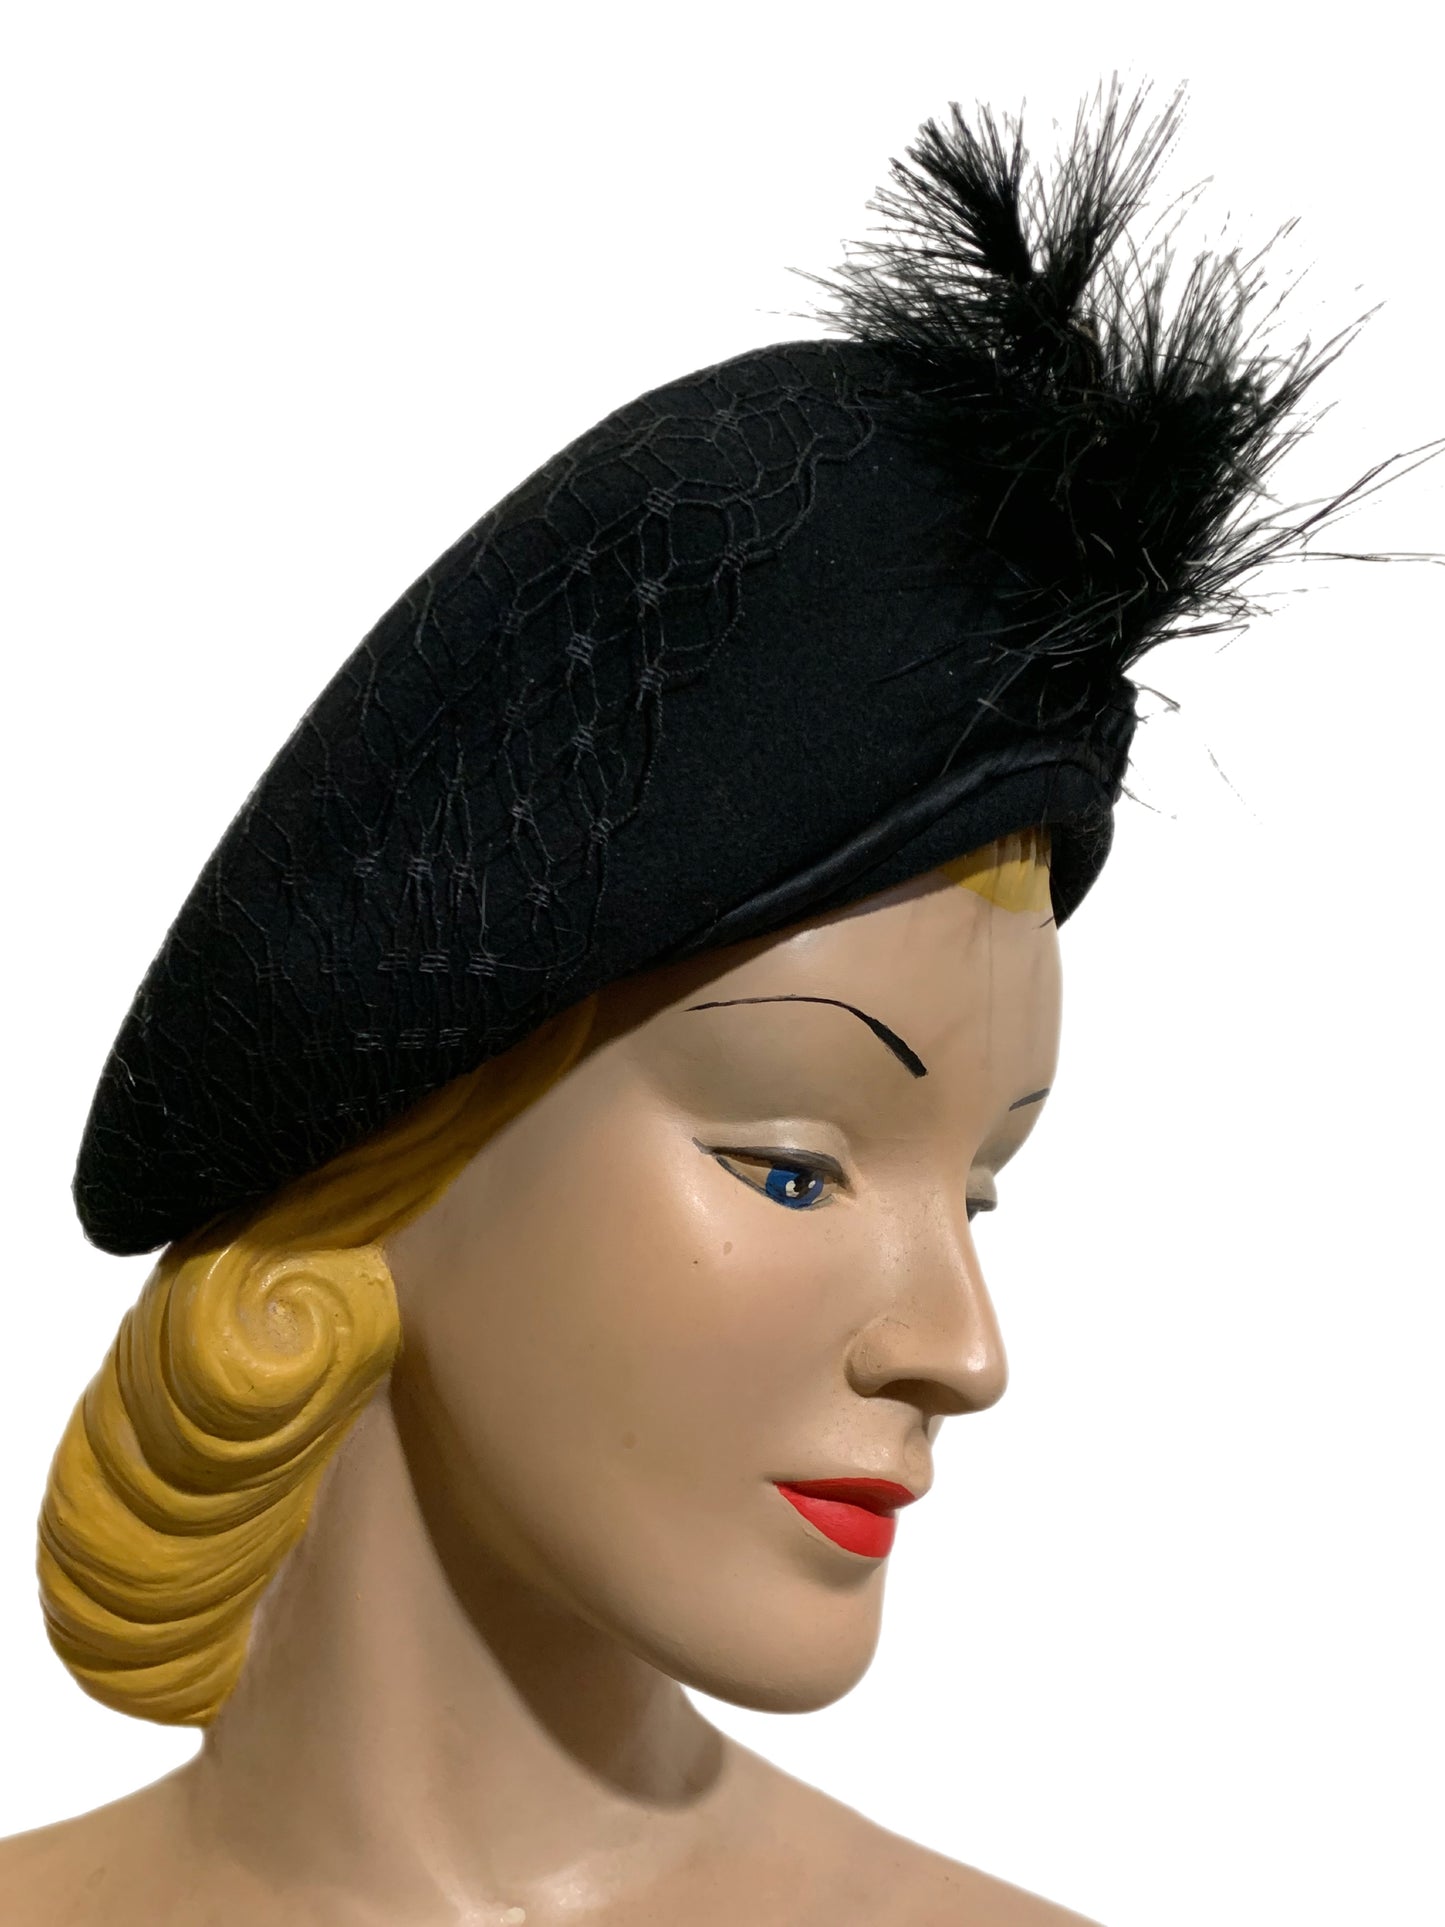 Angled Coal Black Veil Covered Hat with Feather Plume circa 1940s